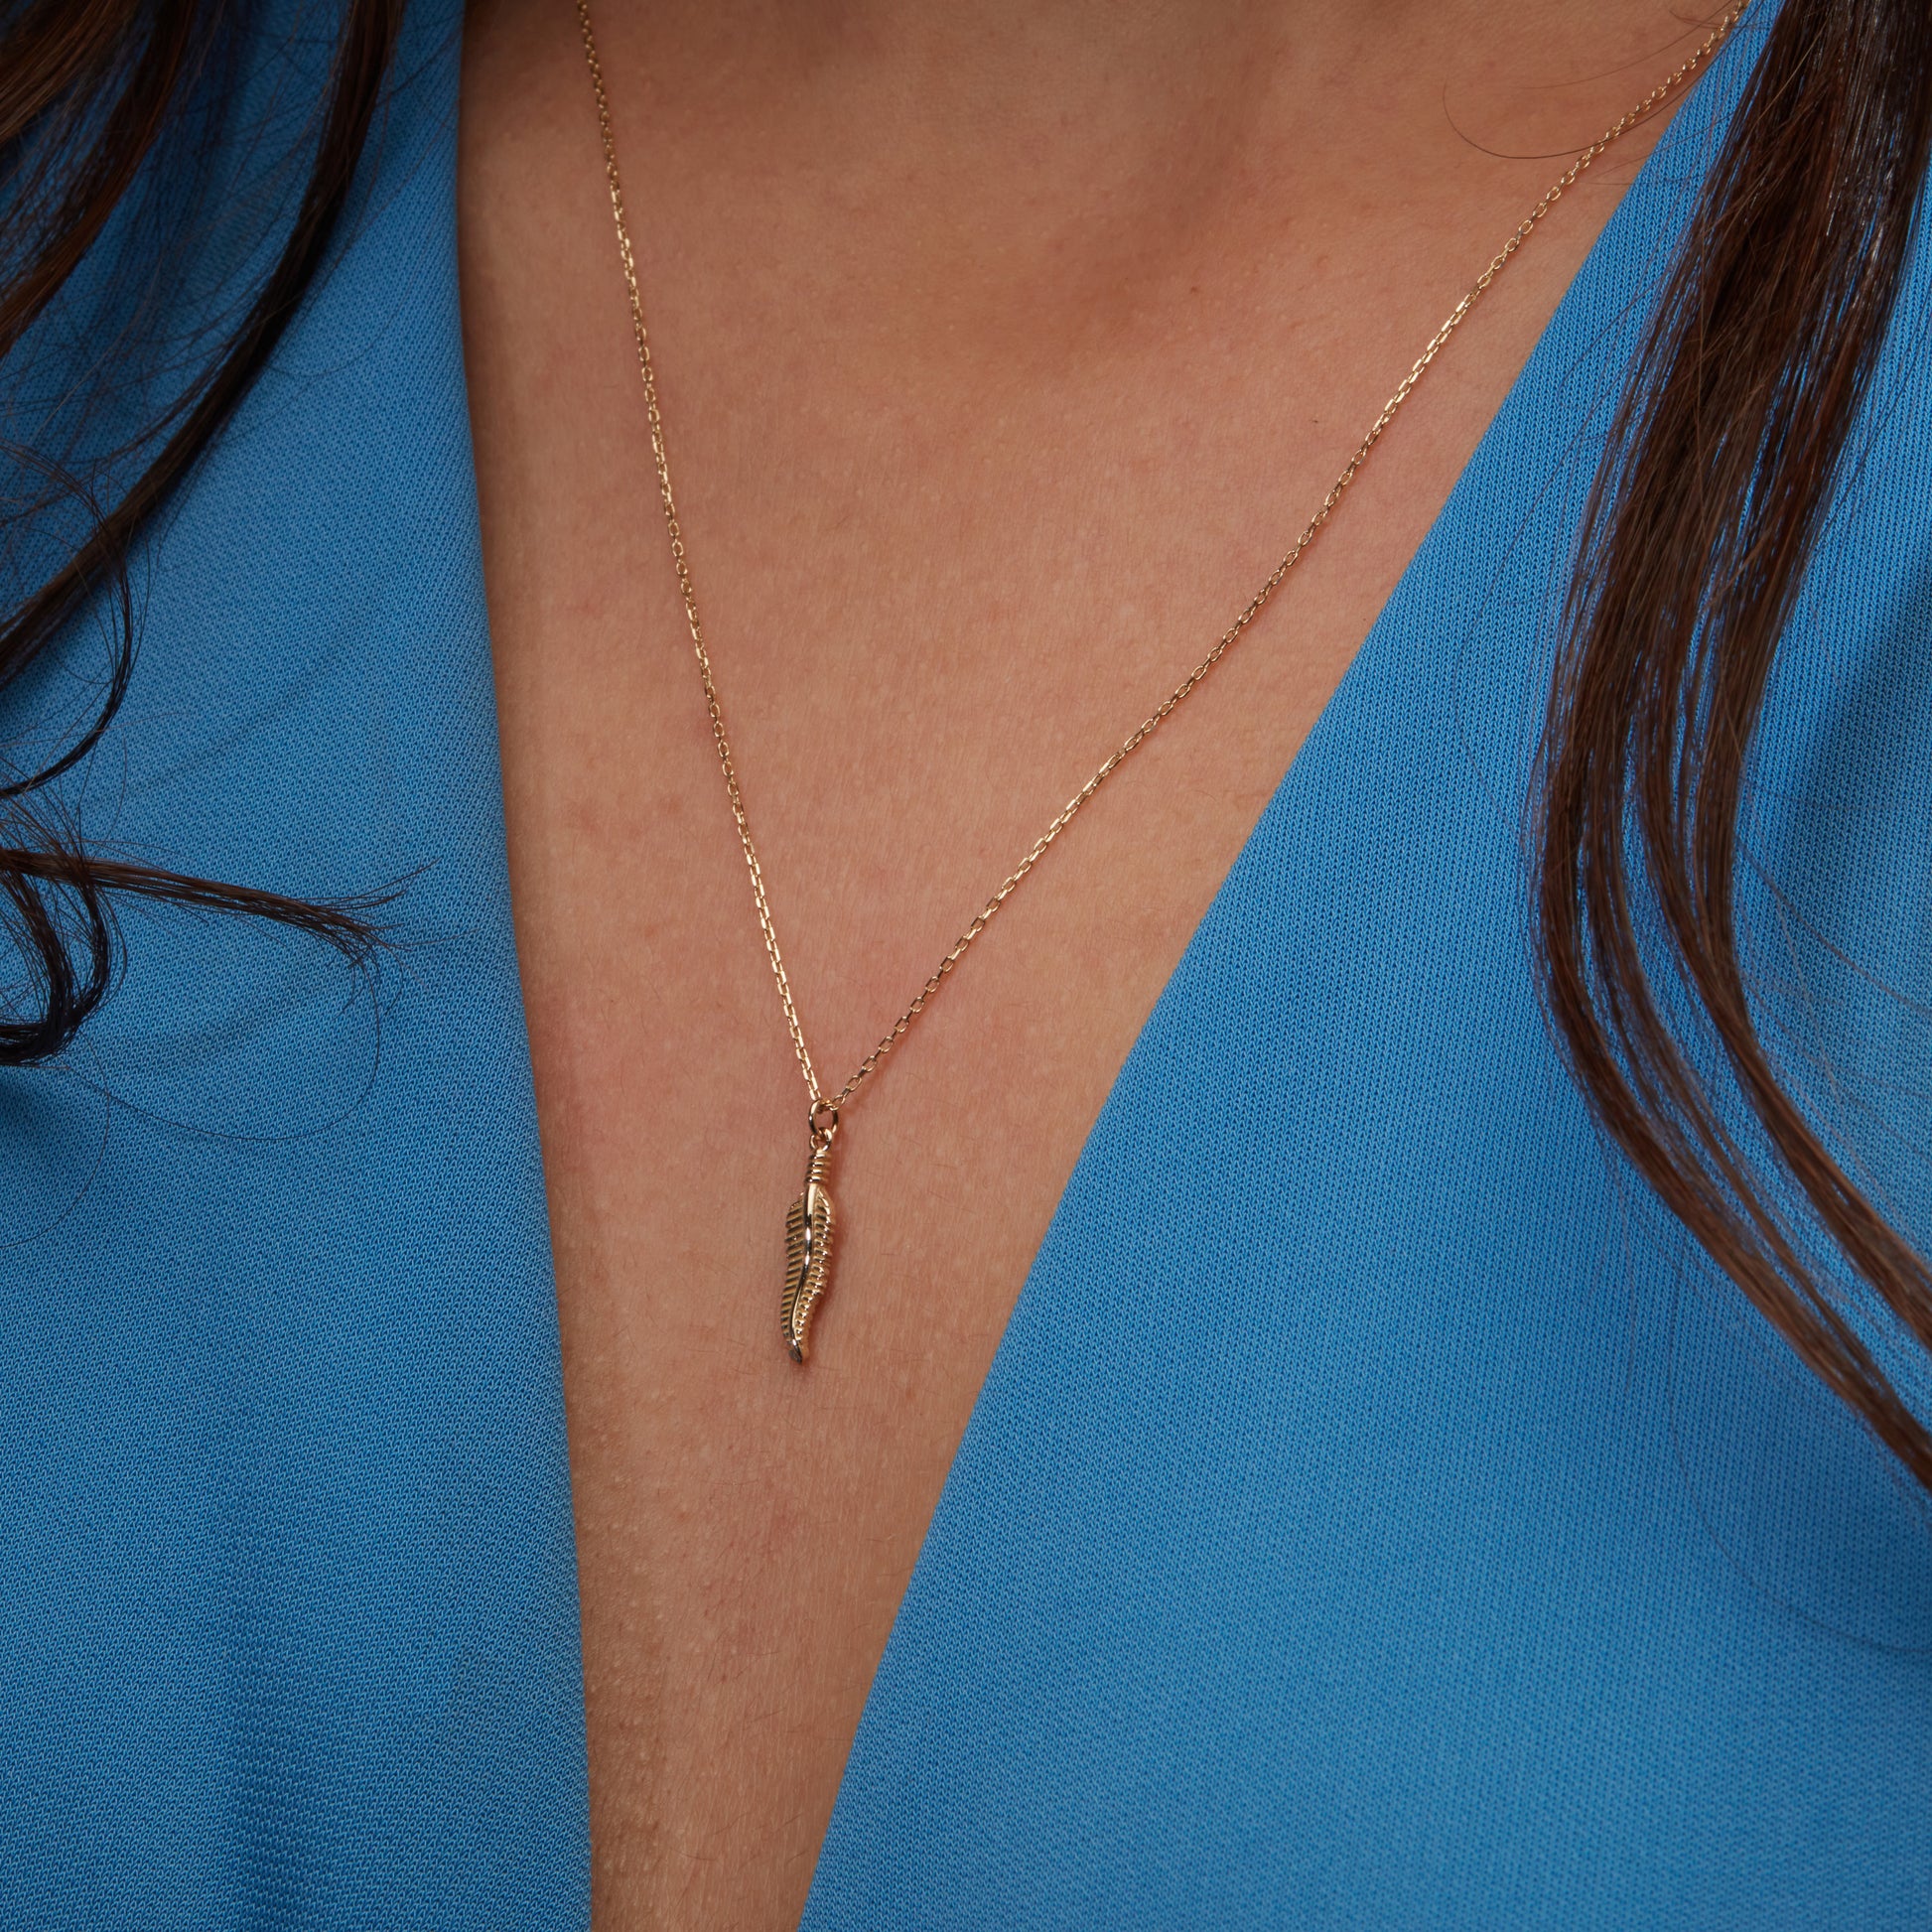 14k gold necklace, dainty gold necklace, gold necklace women, solid gold pendant, solid gold necklace, real gold necklace, yellow rose white, gold leaf necklace, lucky feather charm, gold feather charm, minimalist necklace, gold flower necklace, solid gold leaf, 